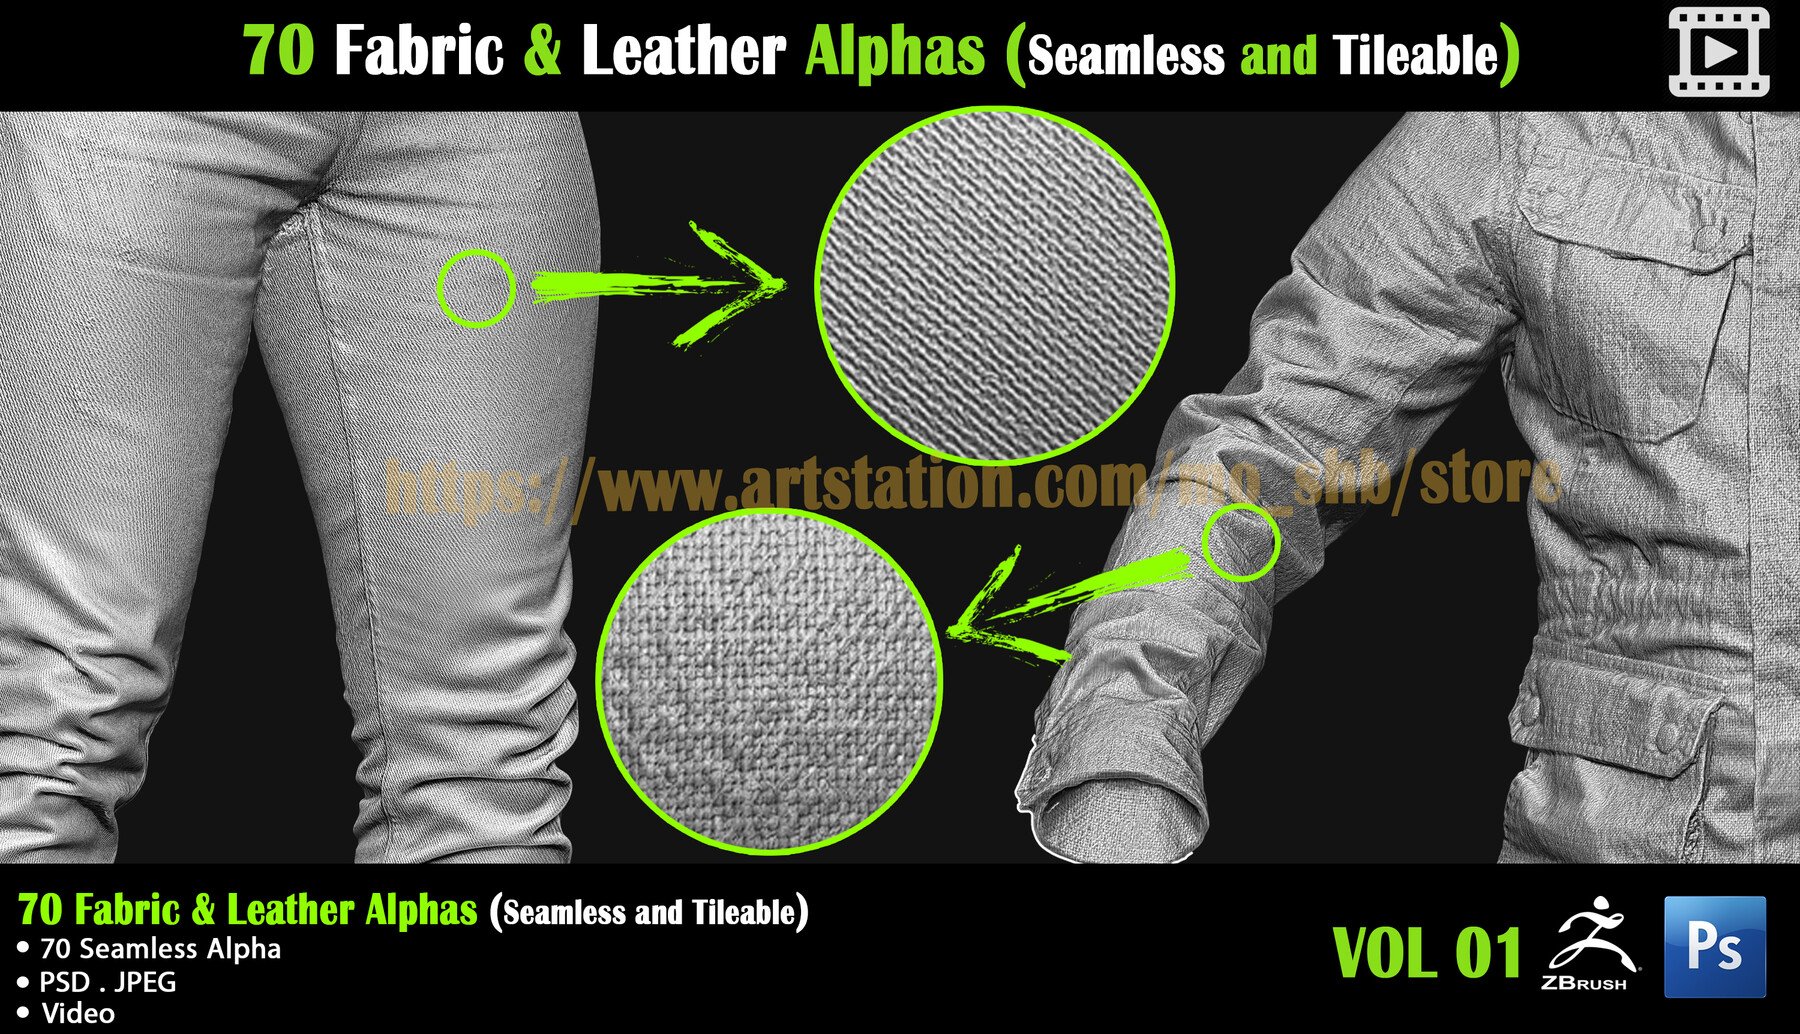 70 Fabric & Leather Alphas (Seamless and Tileable)